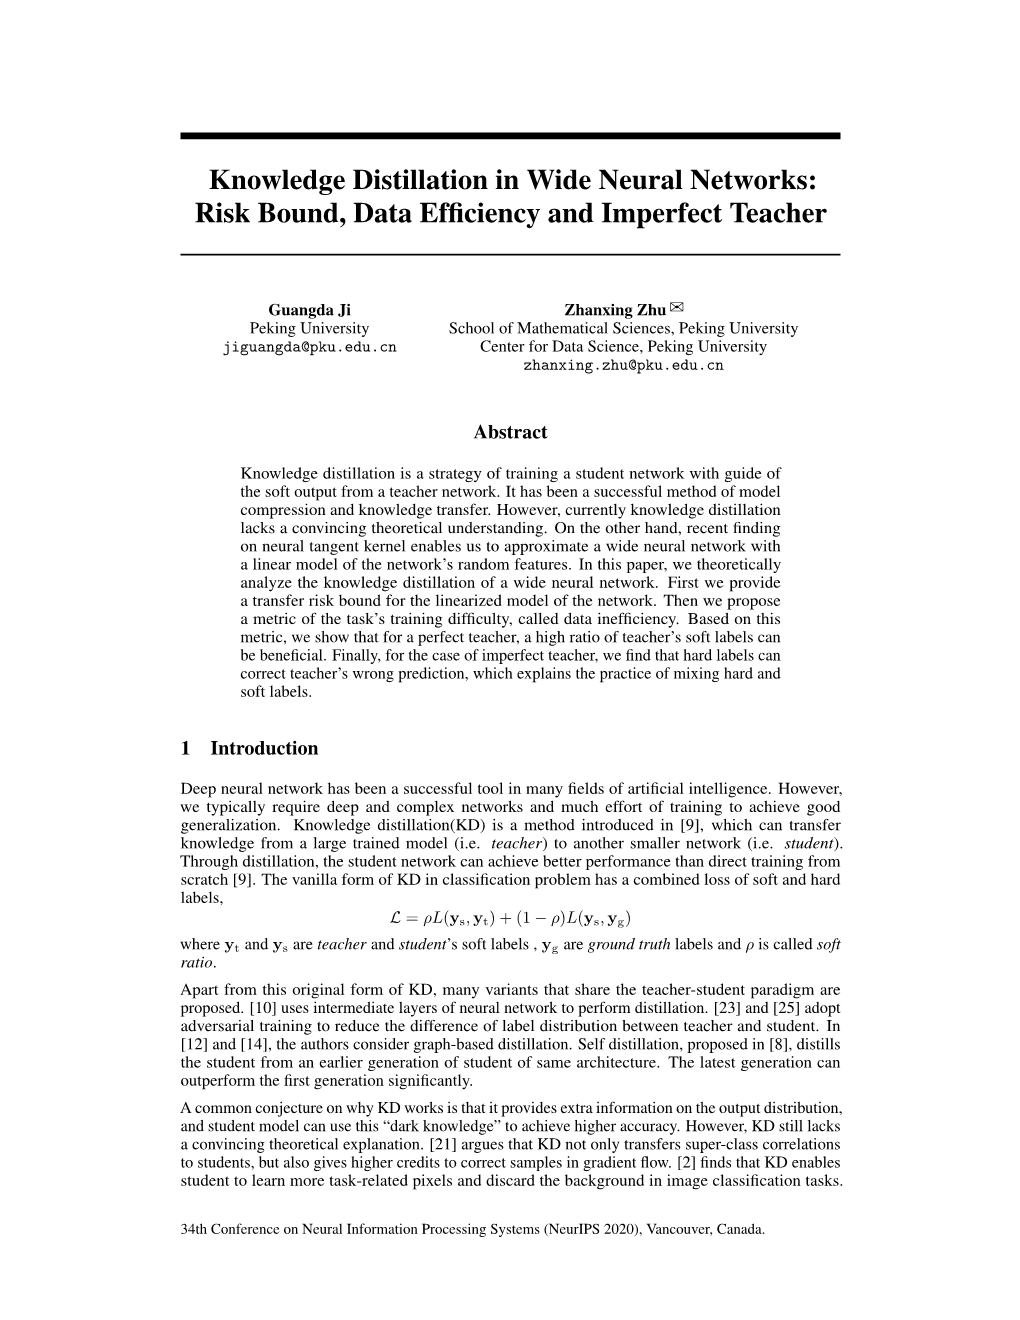 Knowledge Distillation in Wide Neural Networks: Risk Bound, Data Efﬁciency and Imperfect Teacher